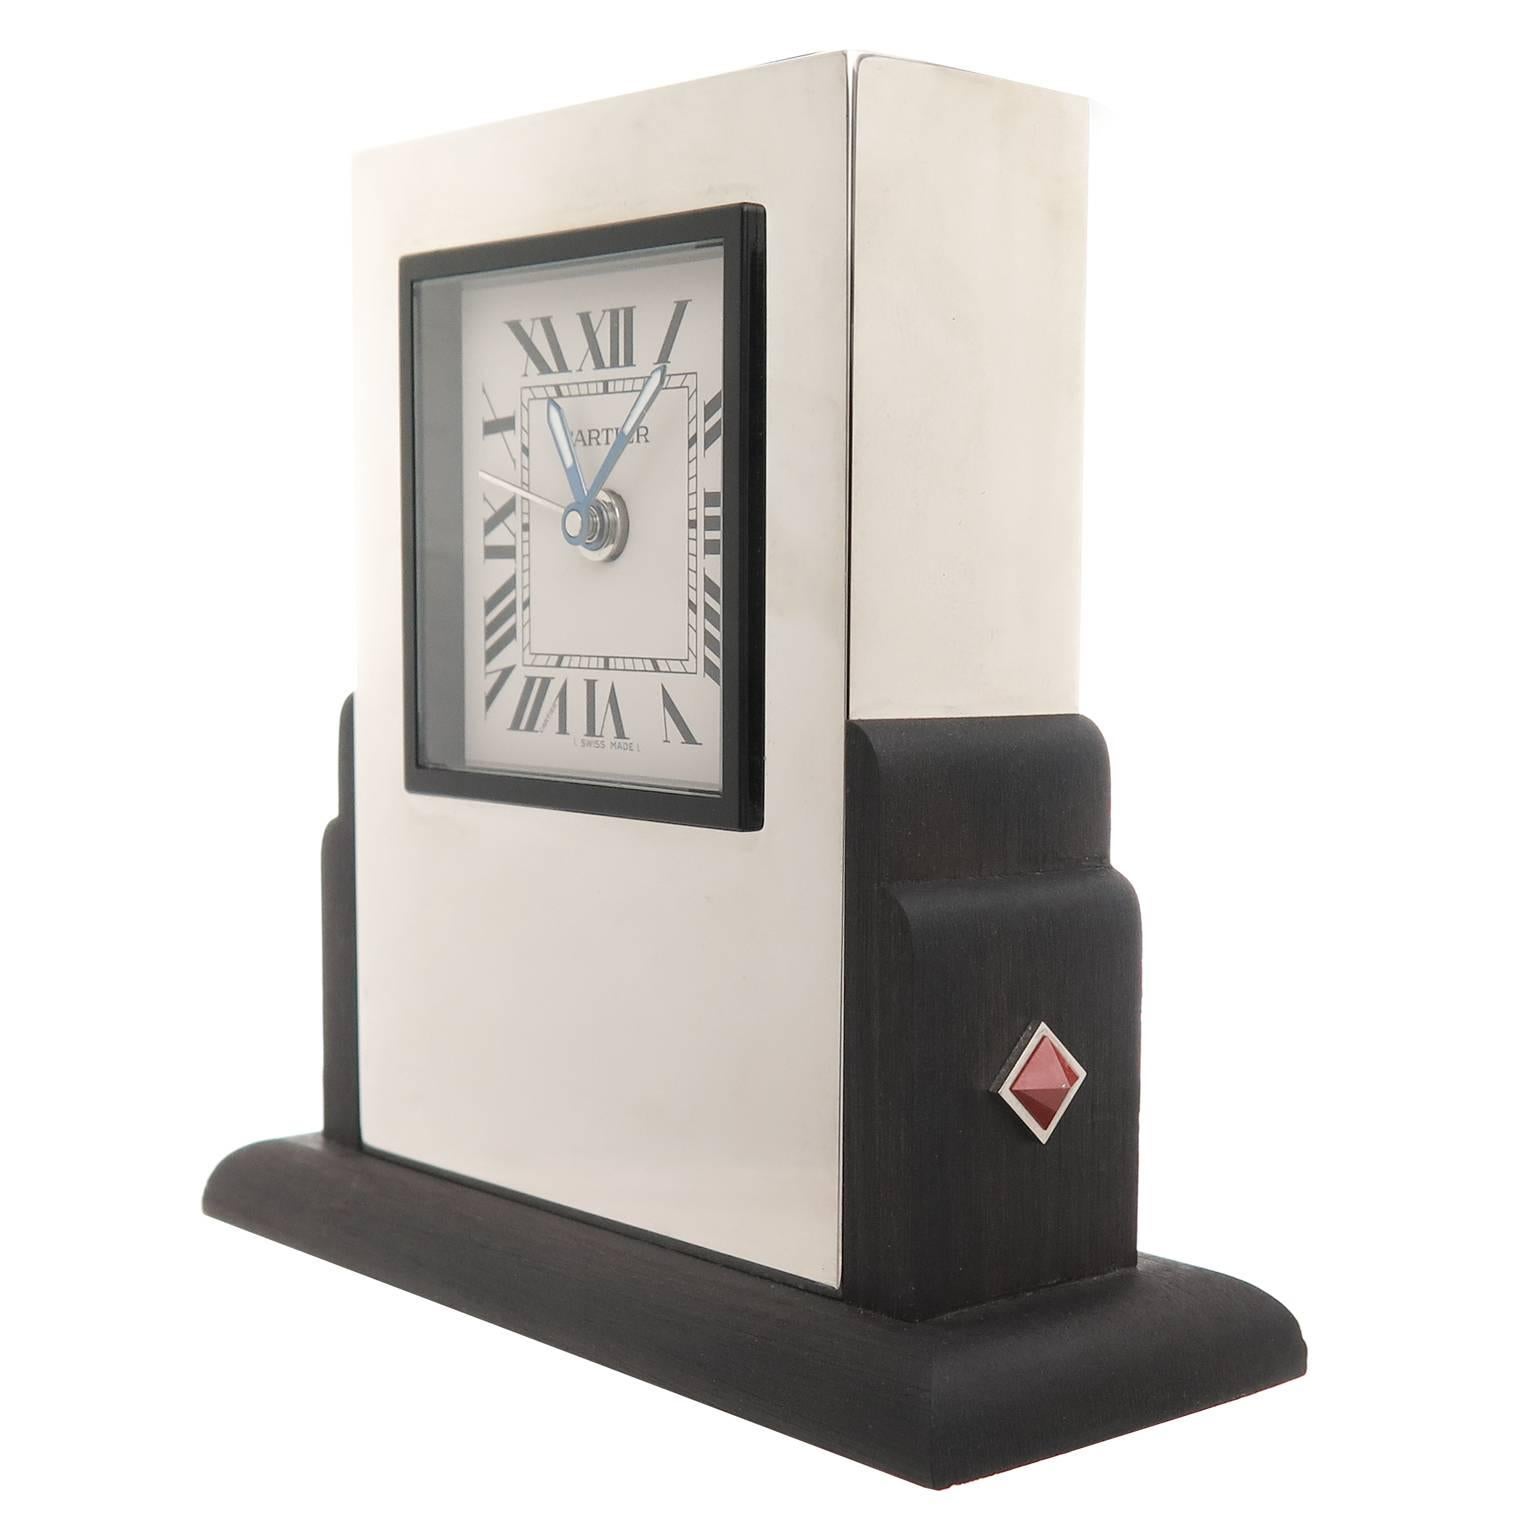 Circa 1990 Cartier  Art Deco style Desk clock, Silver plate, wood base and partial frame, Enamel bezel and having Coral inset decorations. Measuring 3 3/8 in height. Quartz Movement with alarm function, white dial with Black Roman numerals and